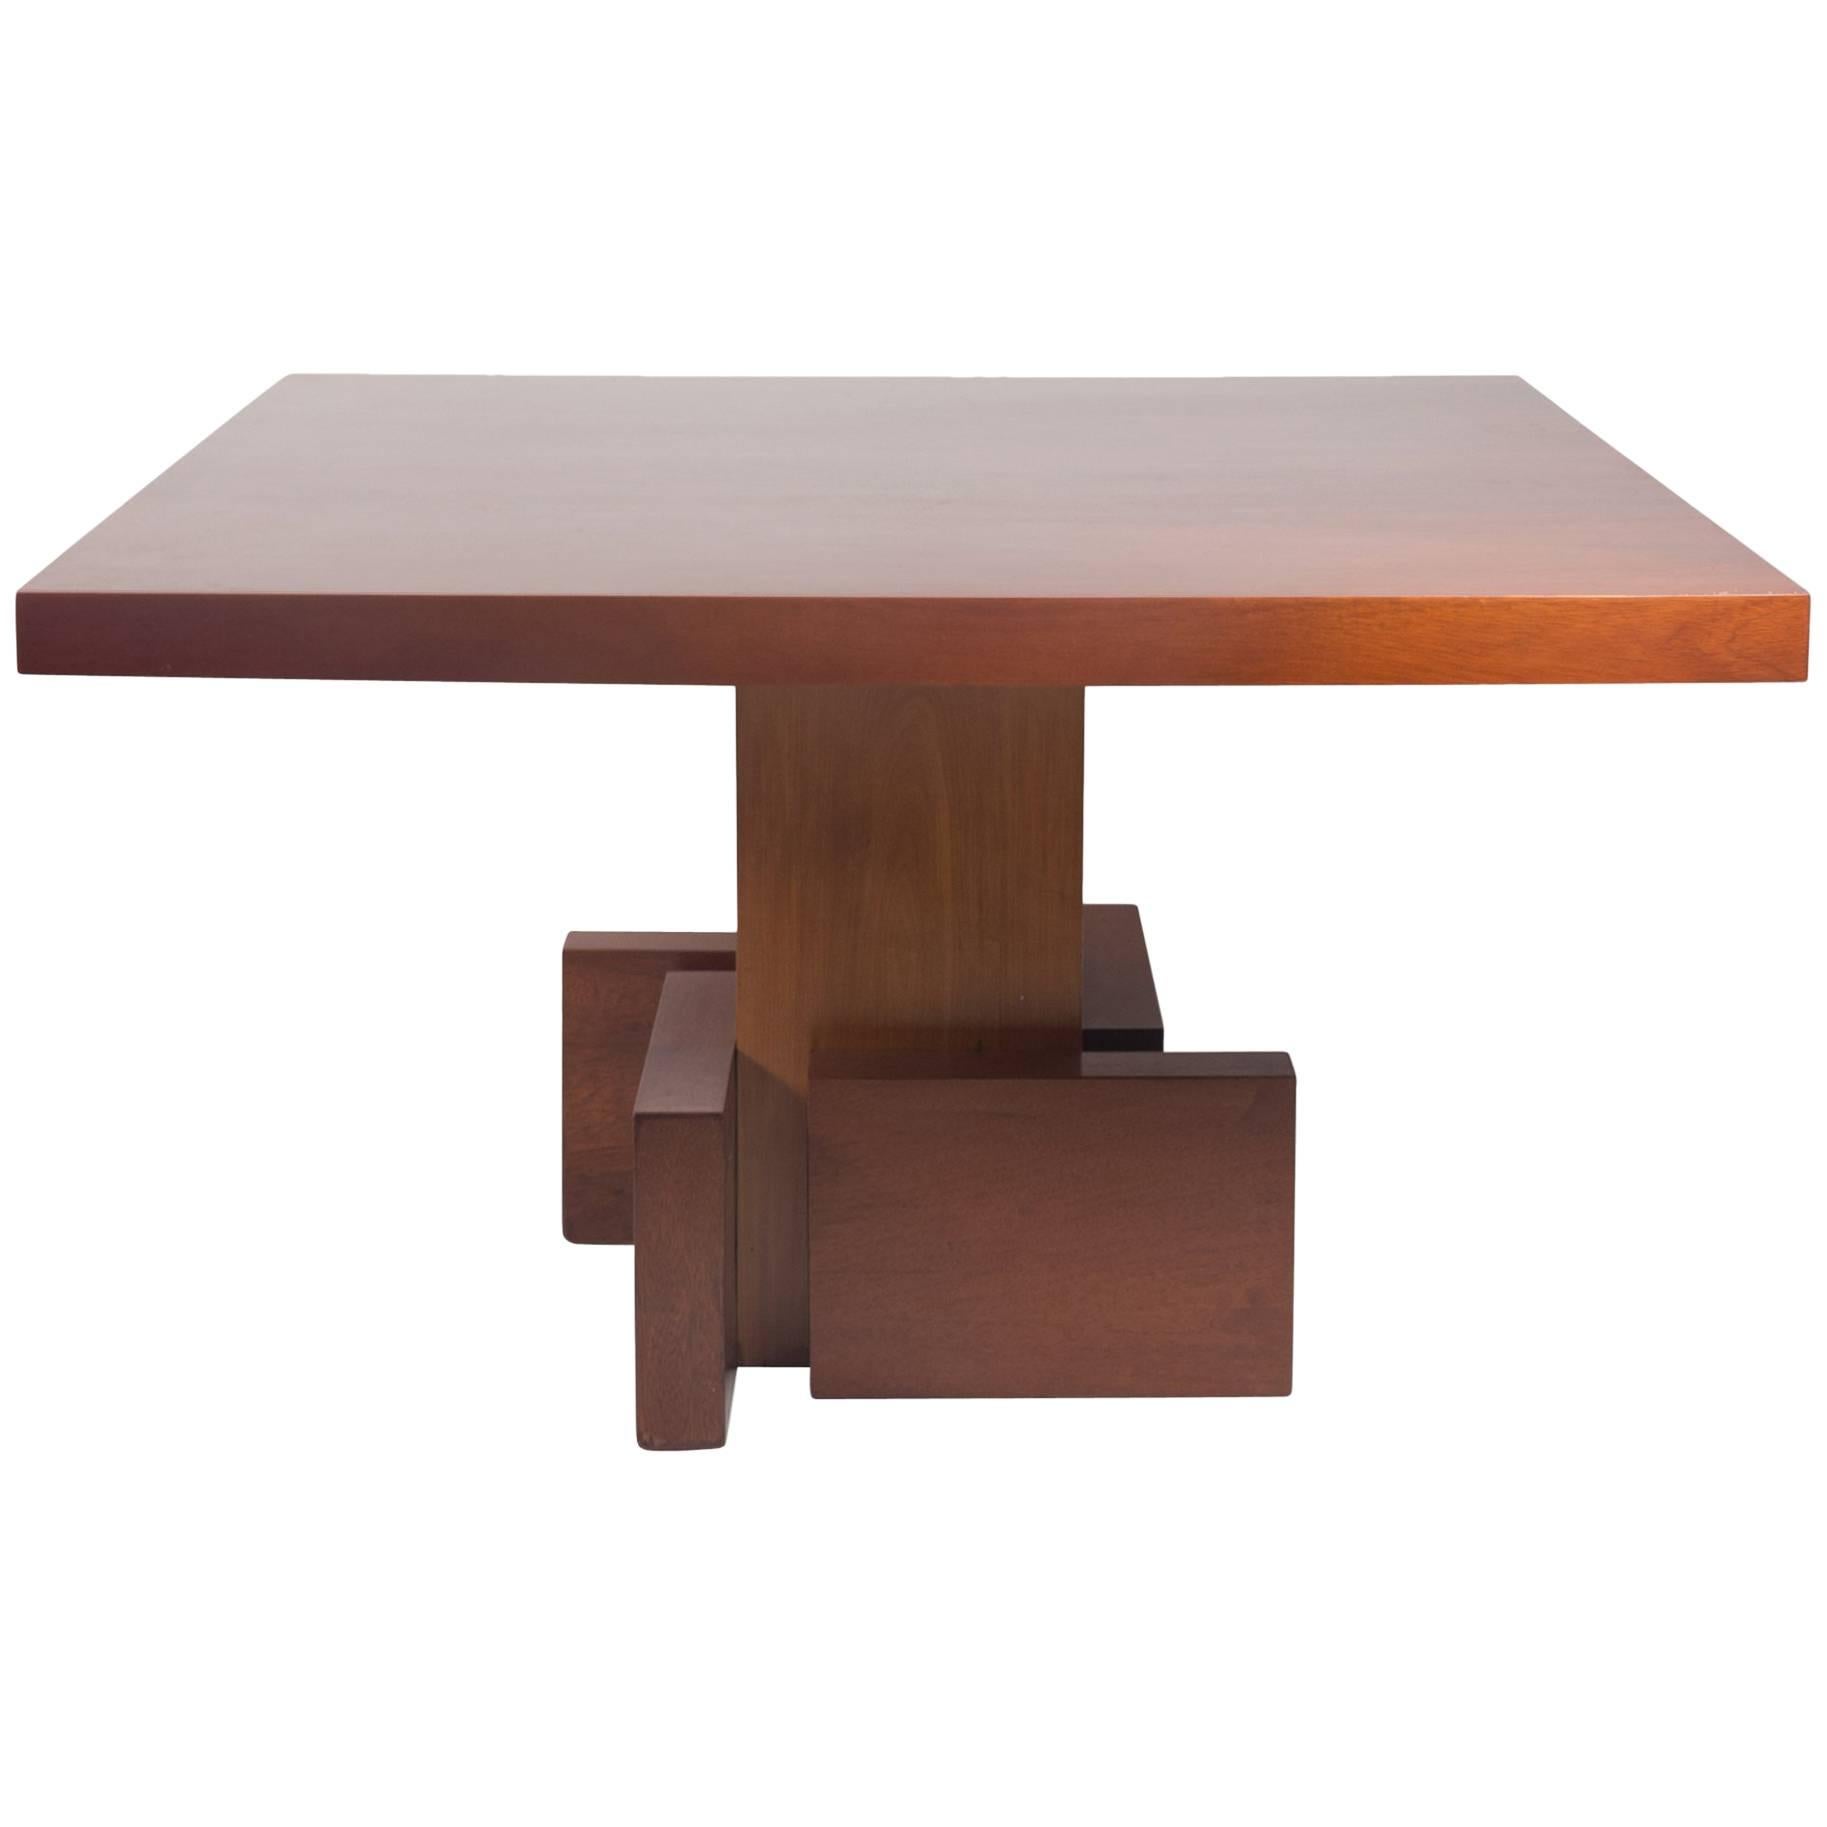 Cubist Pedestal Base Square Dining Table, French, 1930s For Sale